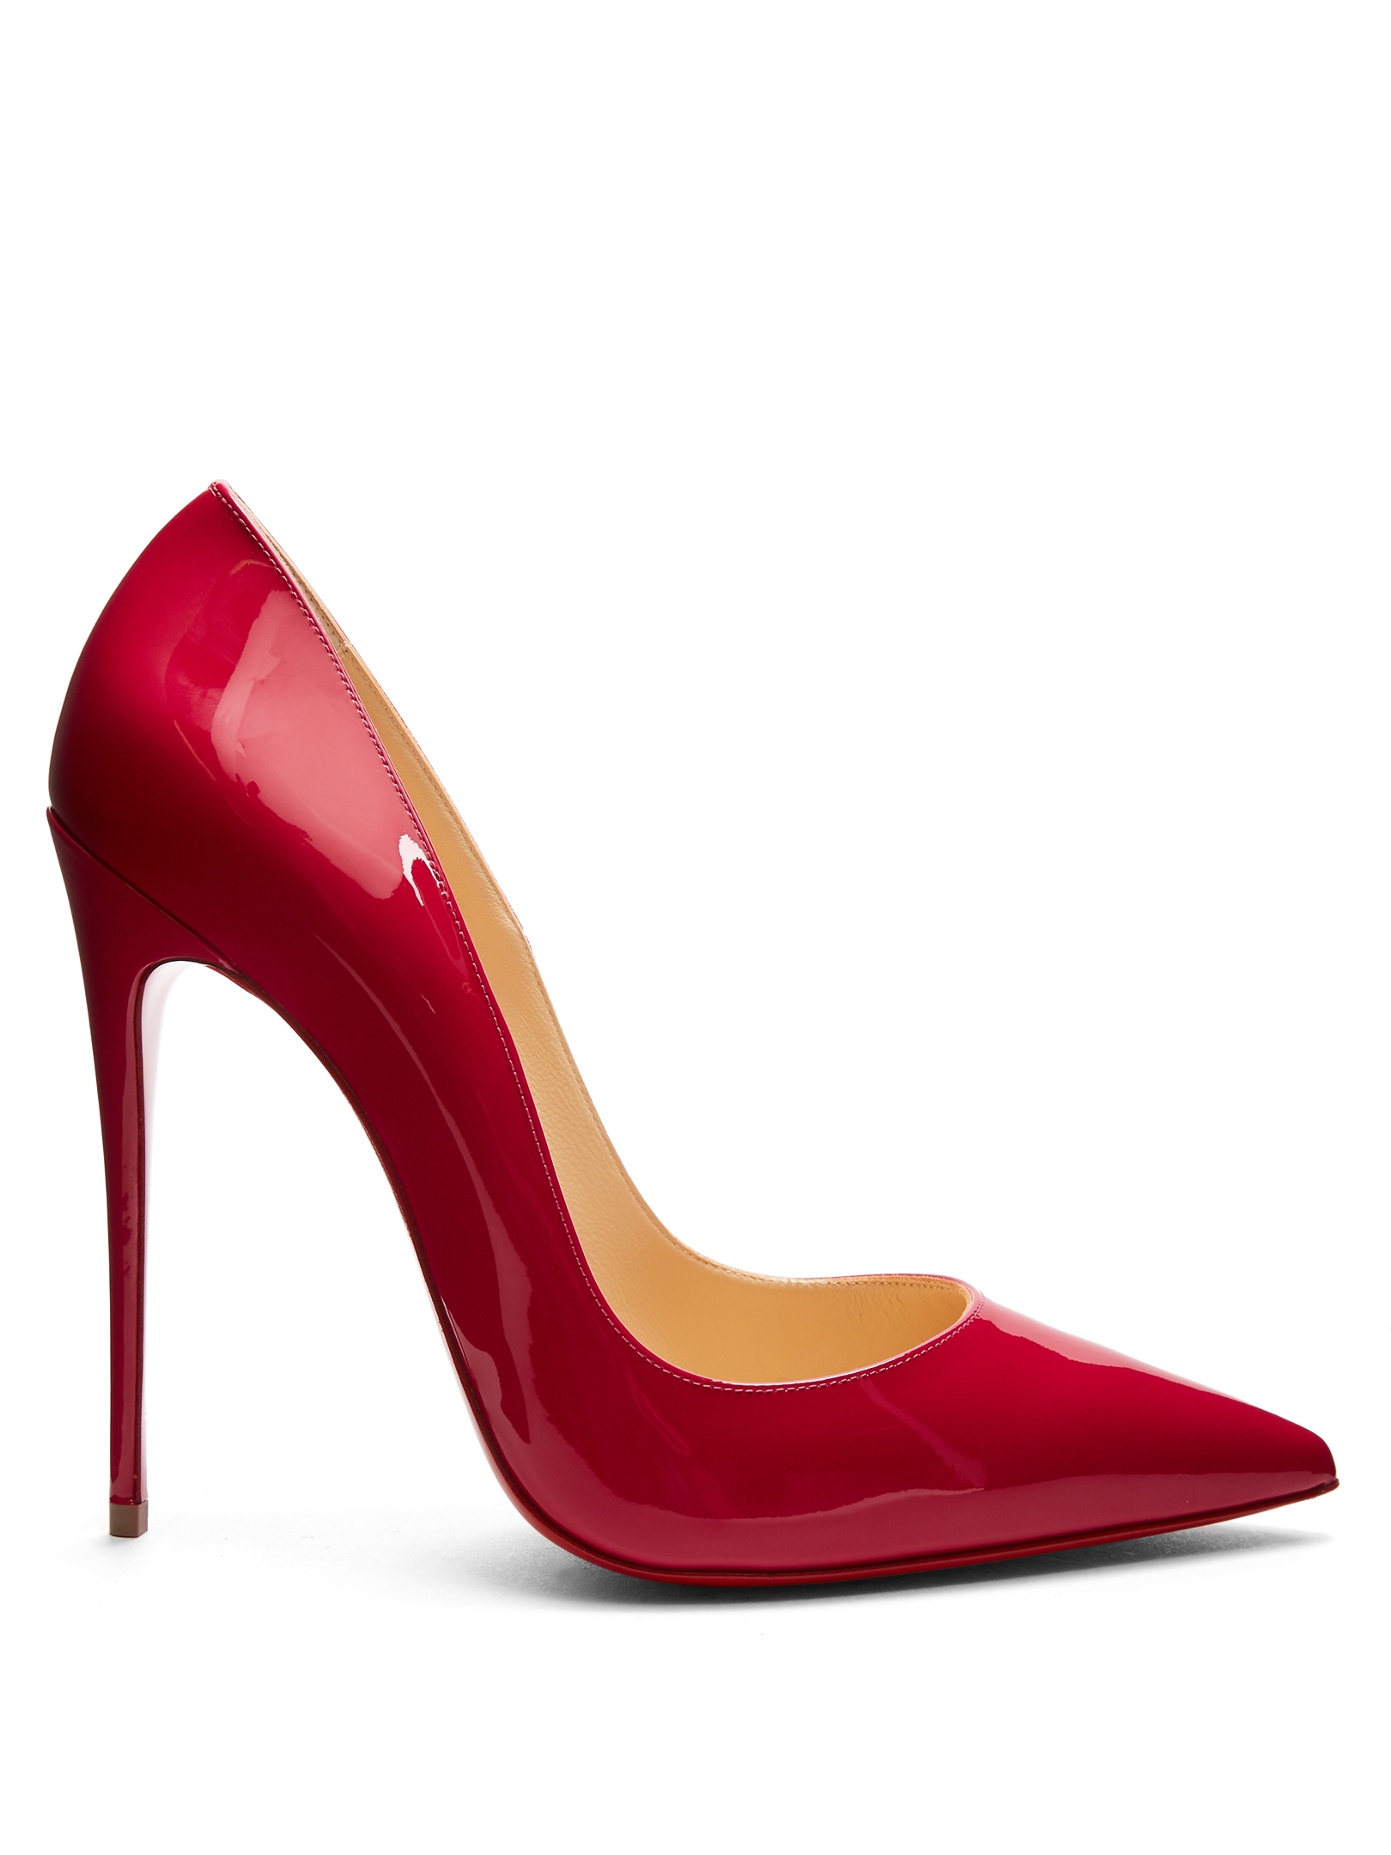 Christian Louboutin So Kate in Red 